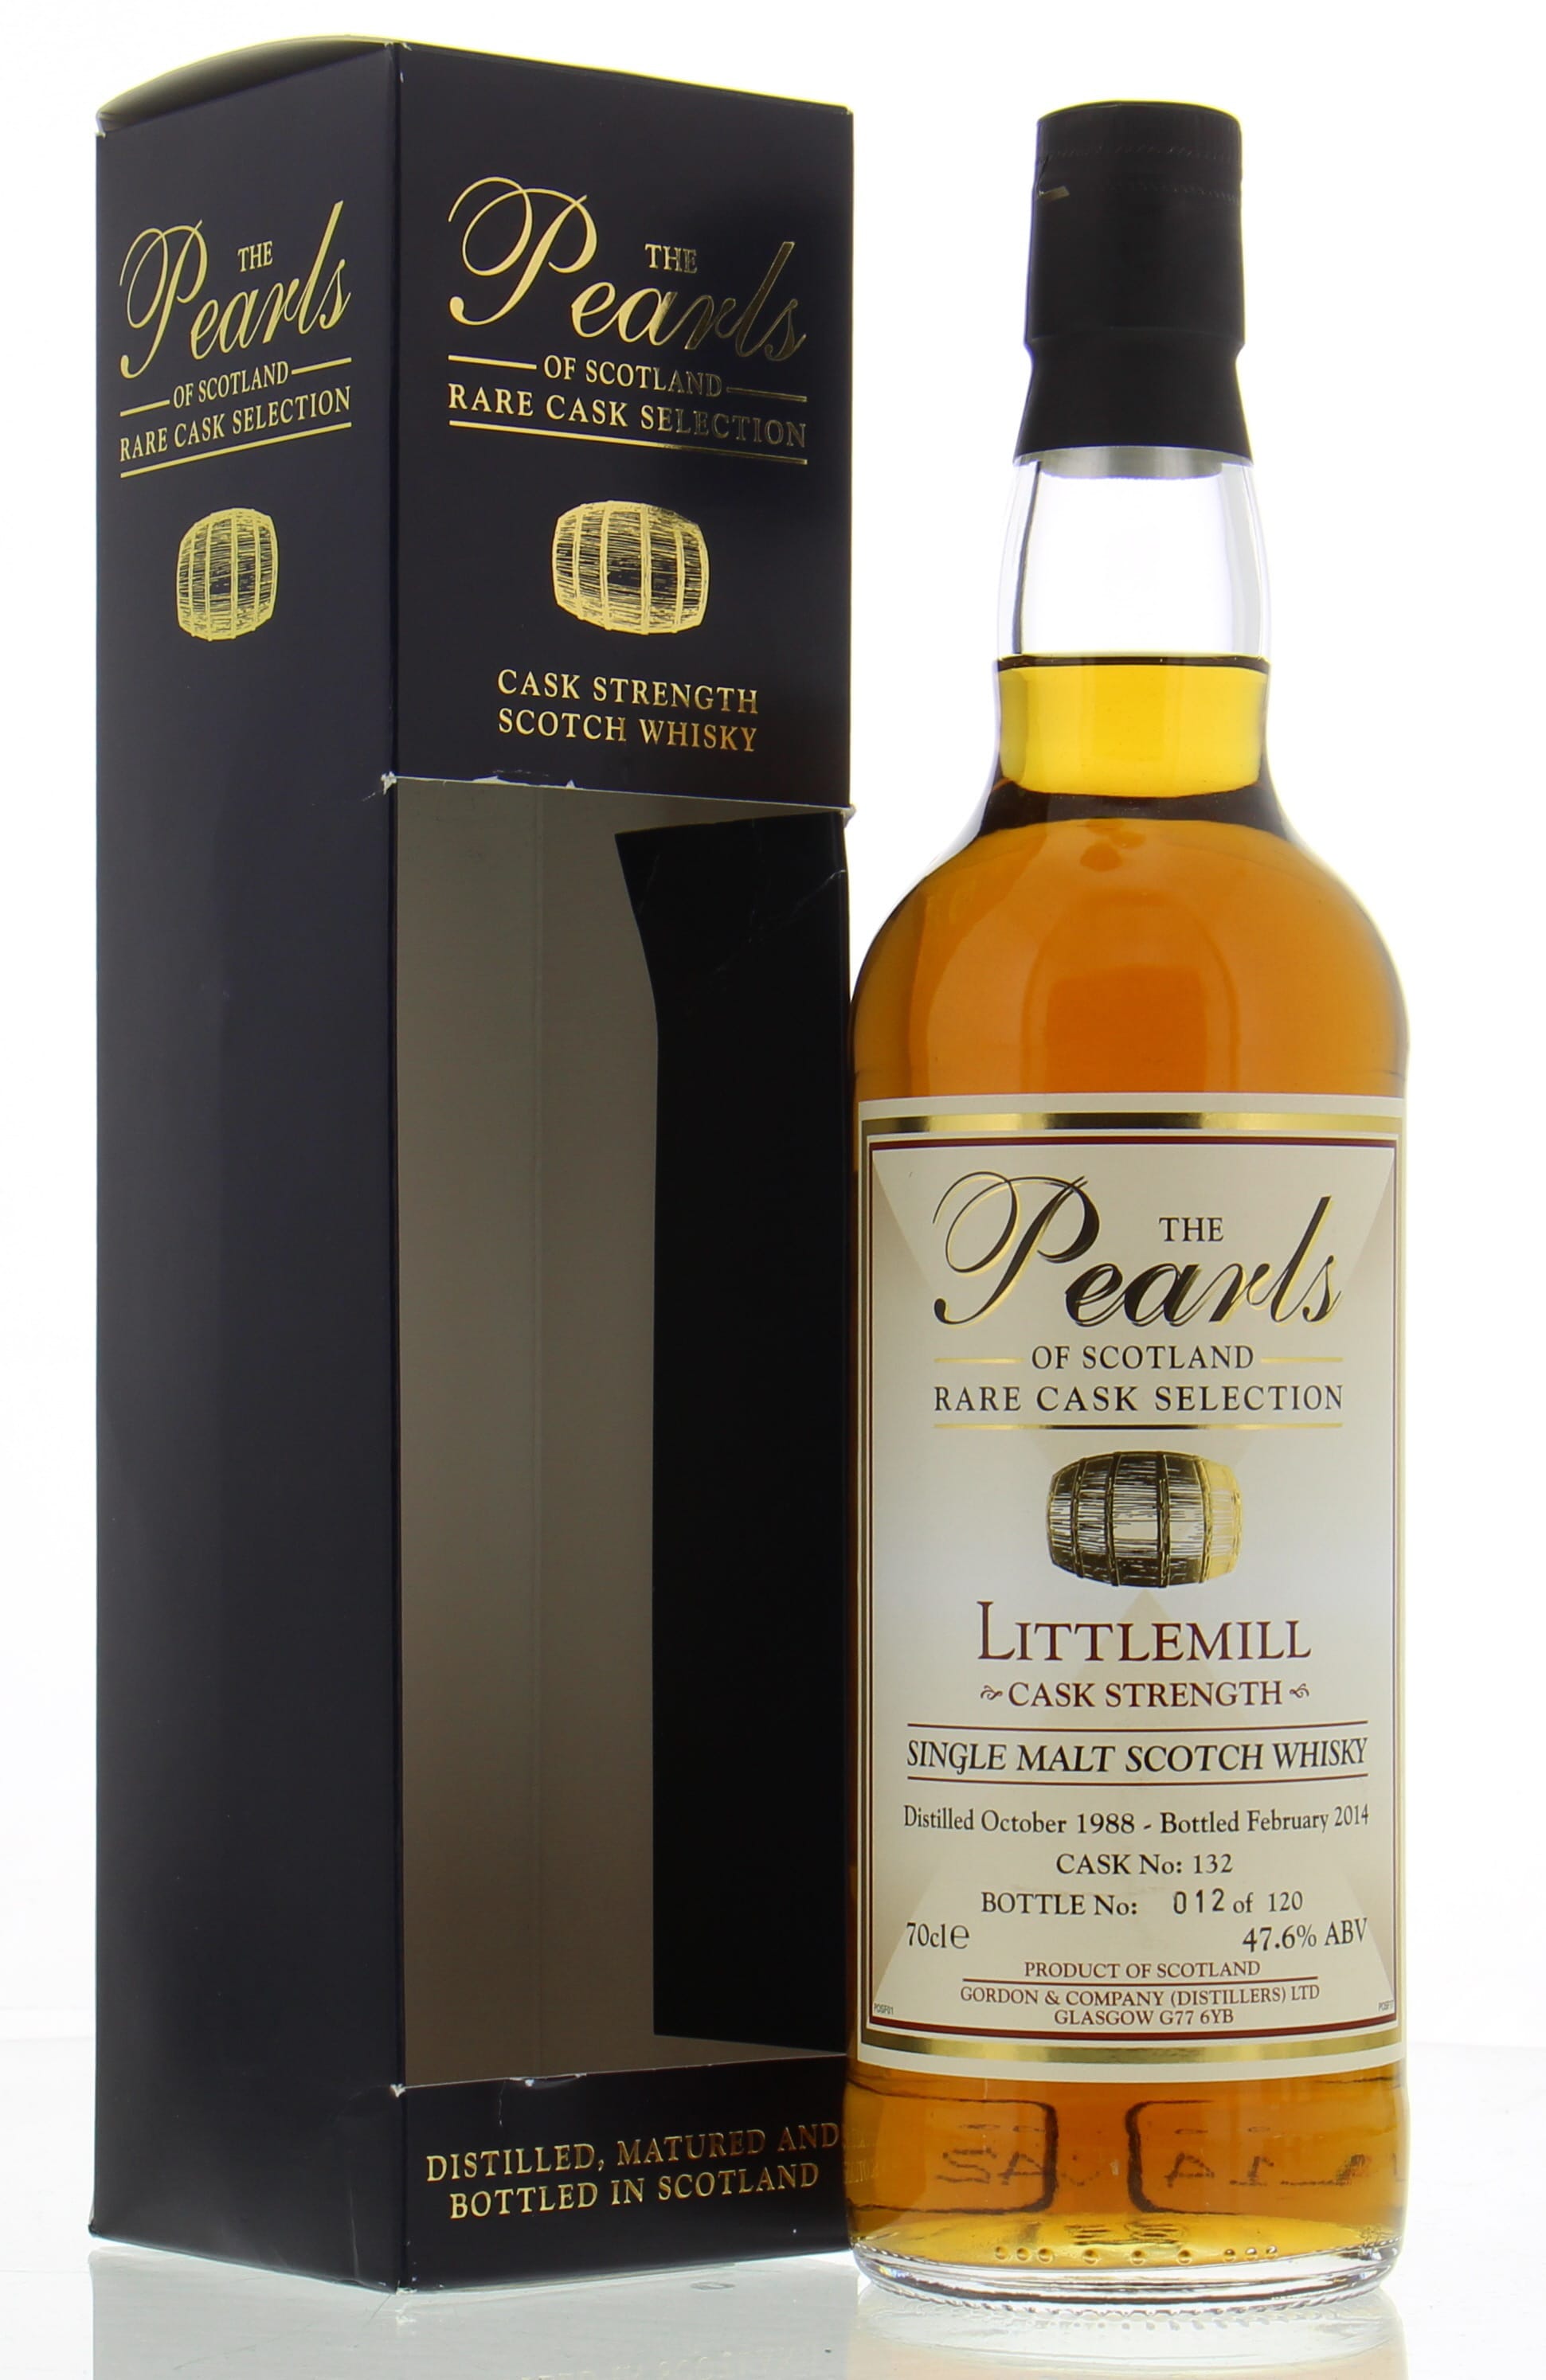 Littlemill - 26 Years Old The Pearls of Scotland Cask:132 47.6% 1988 In Original Container